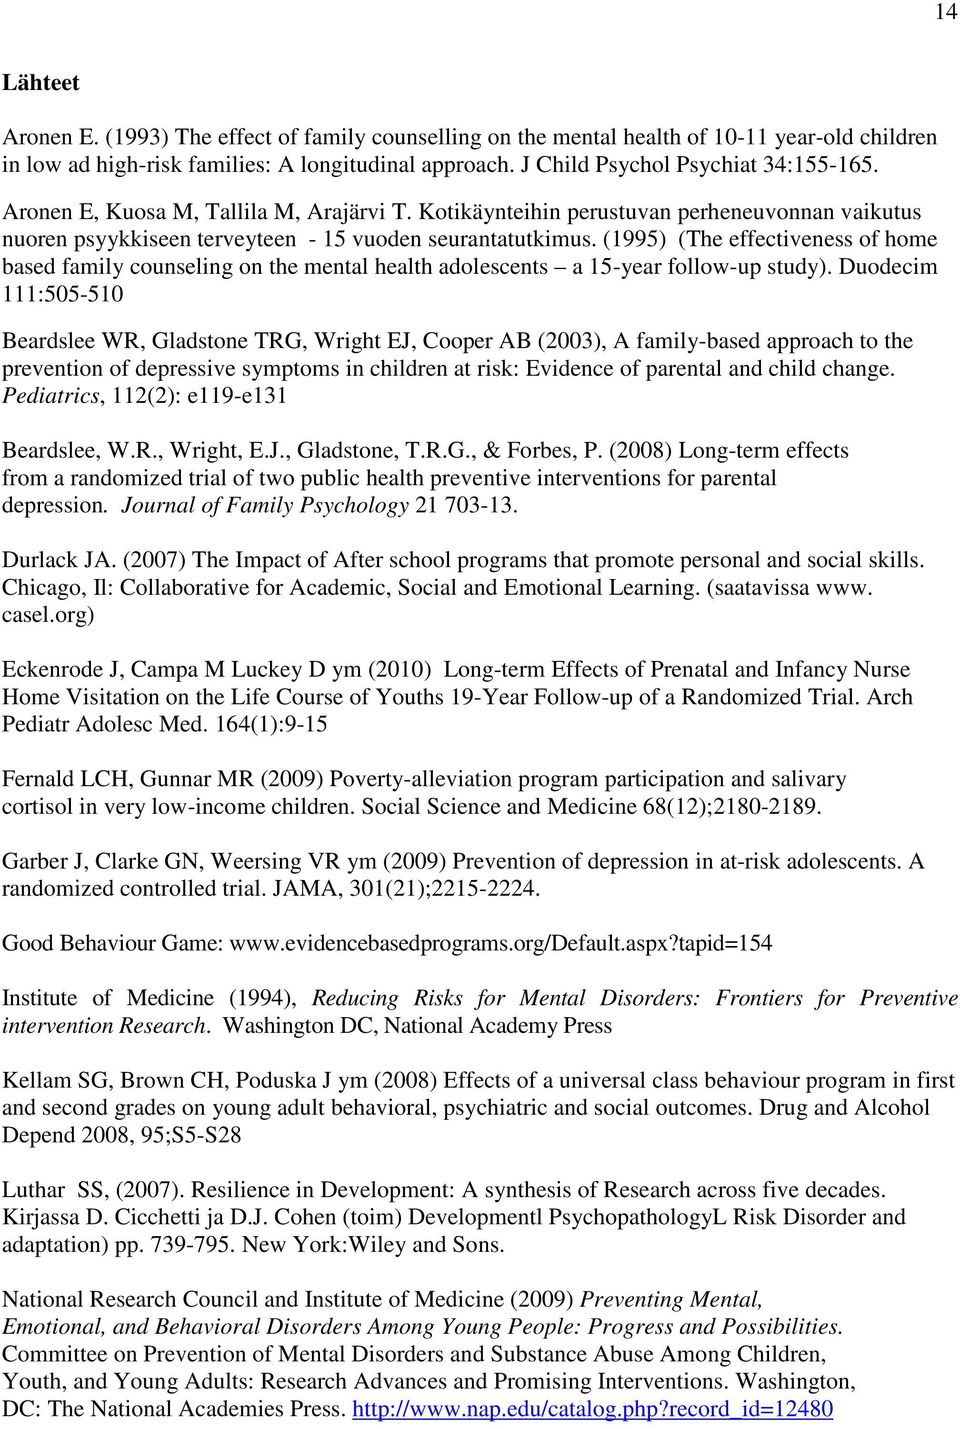 (1995) (The effectiveness of home based family counseling on the mental health adolescents a 15-year follow-up study).